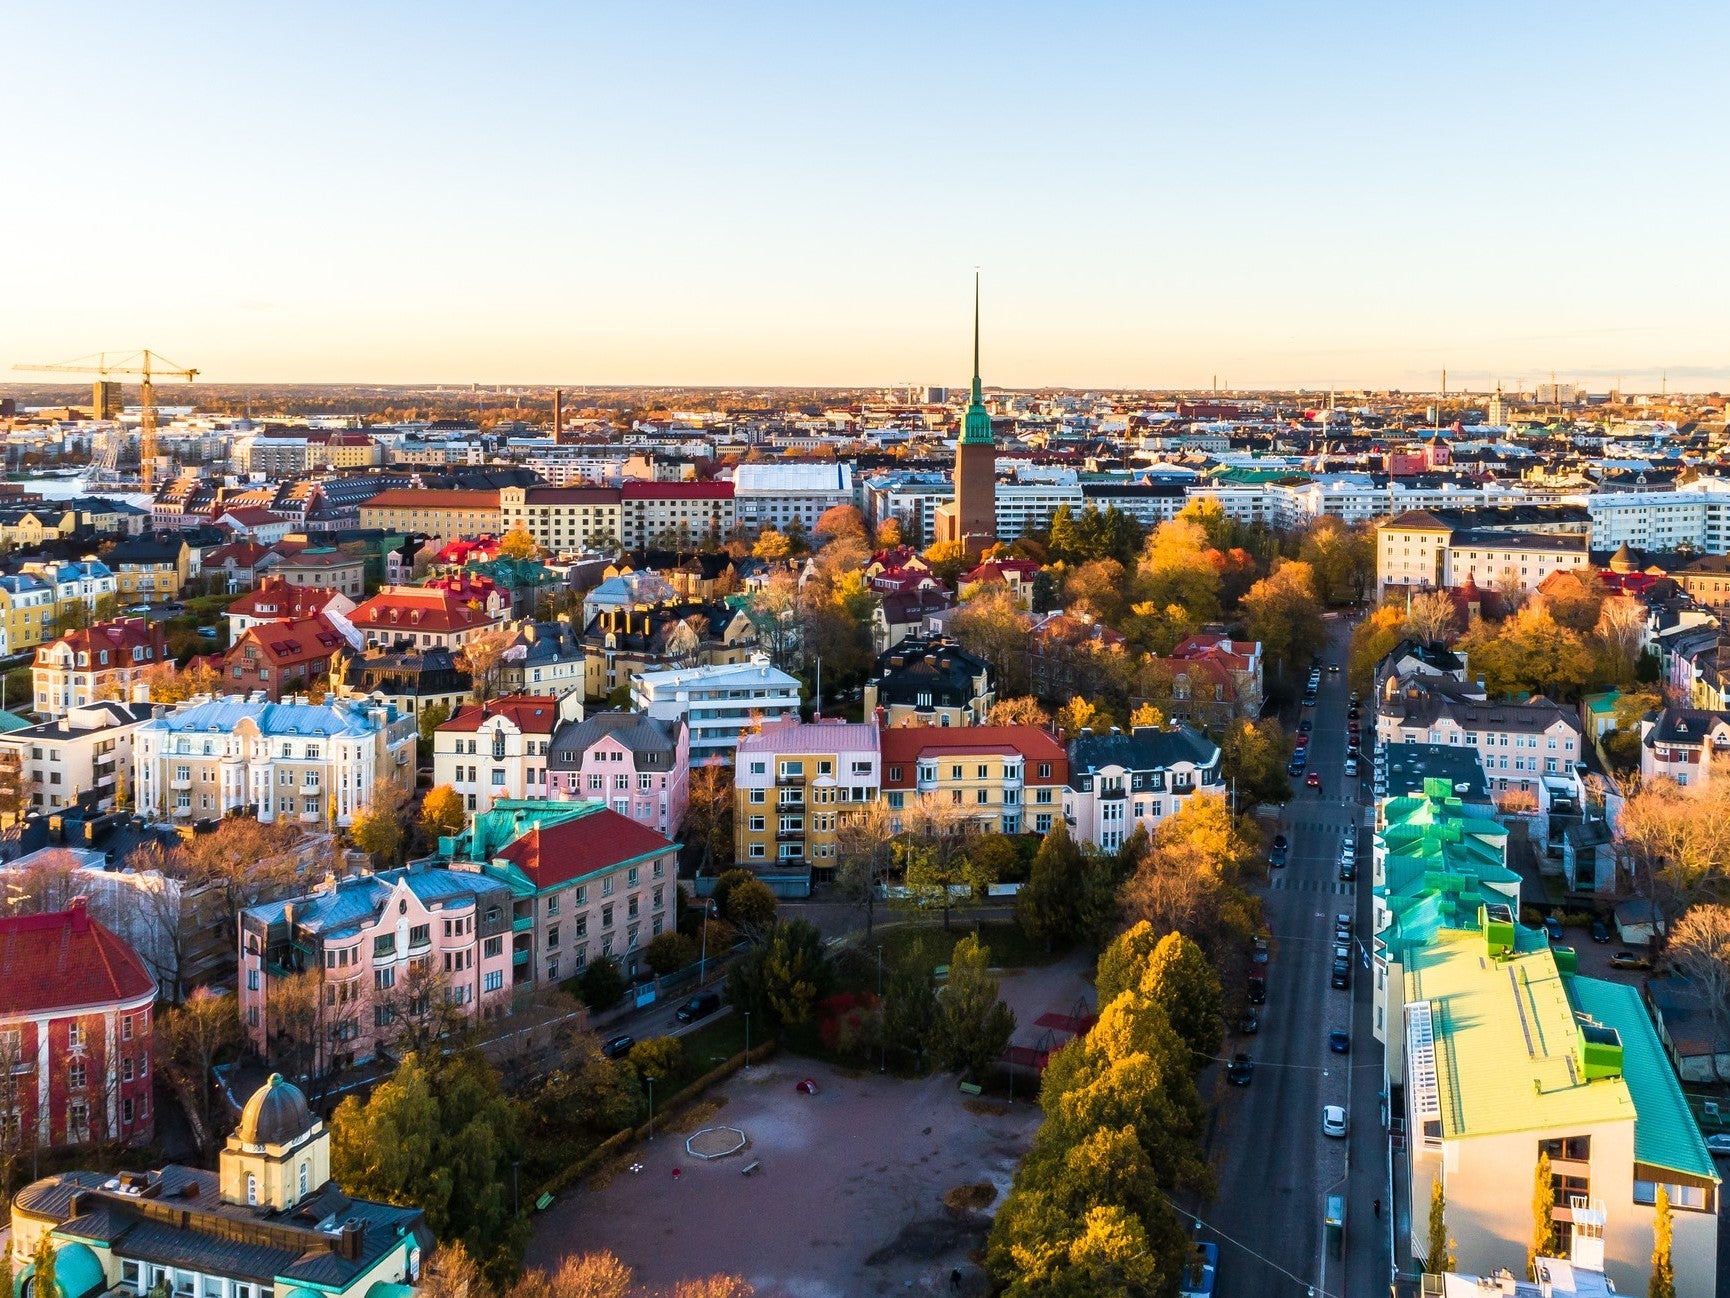 While the rest of the world burns, Helsinki is blissfully saunaing towards carbon neutrality